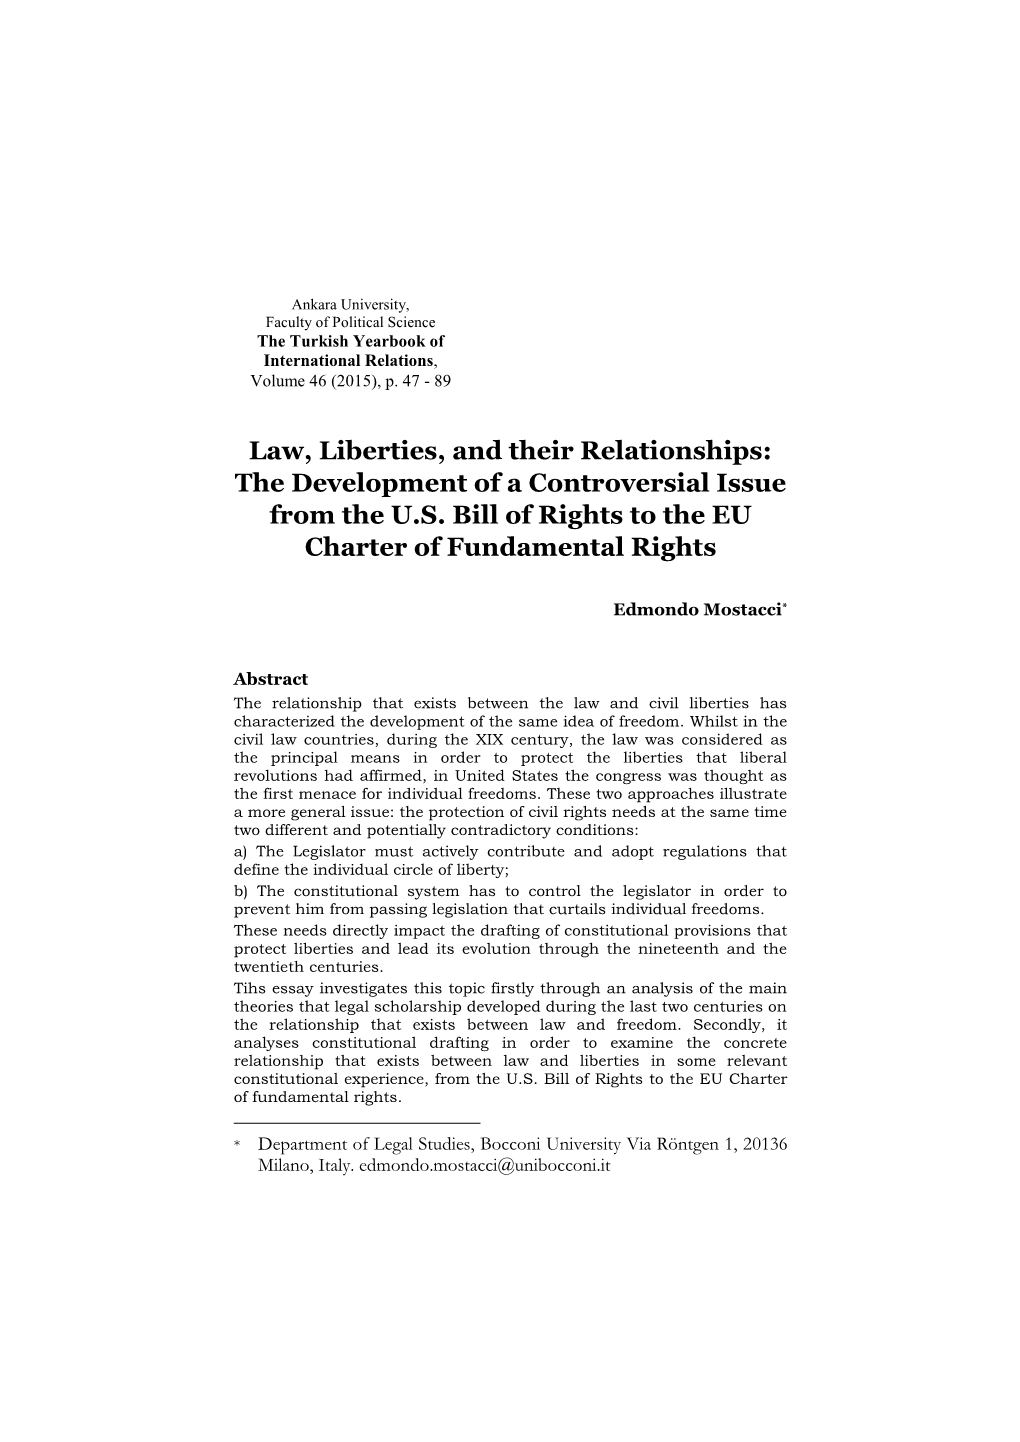 Law, Liberties, and Their Relationships: the Development of a Controversial Issue from the U.S